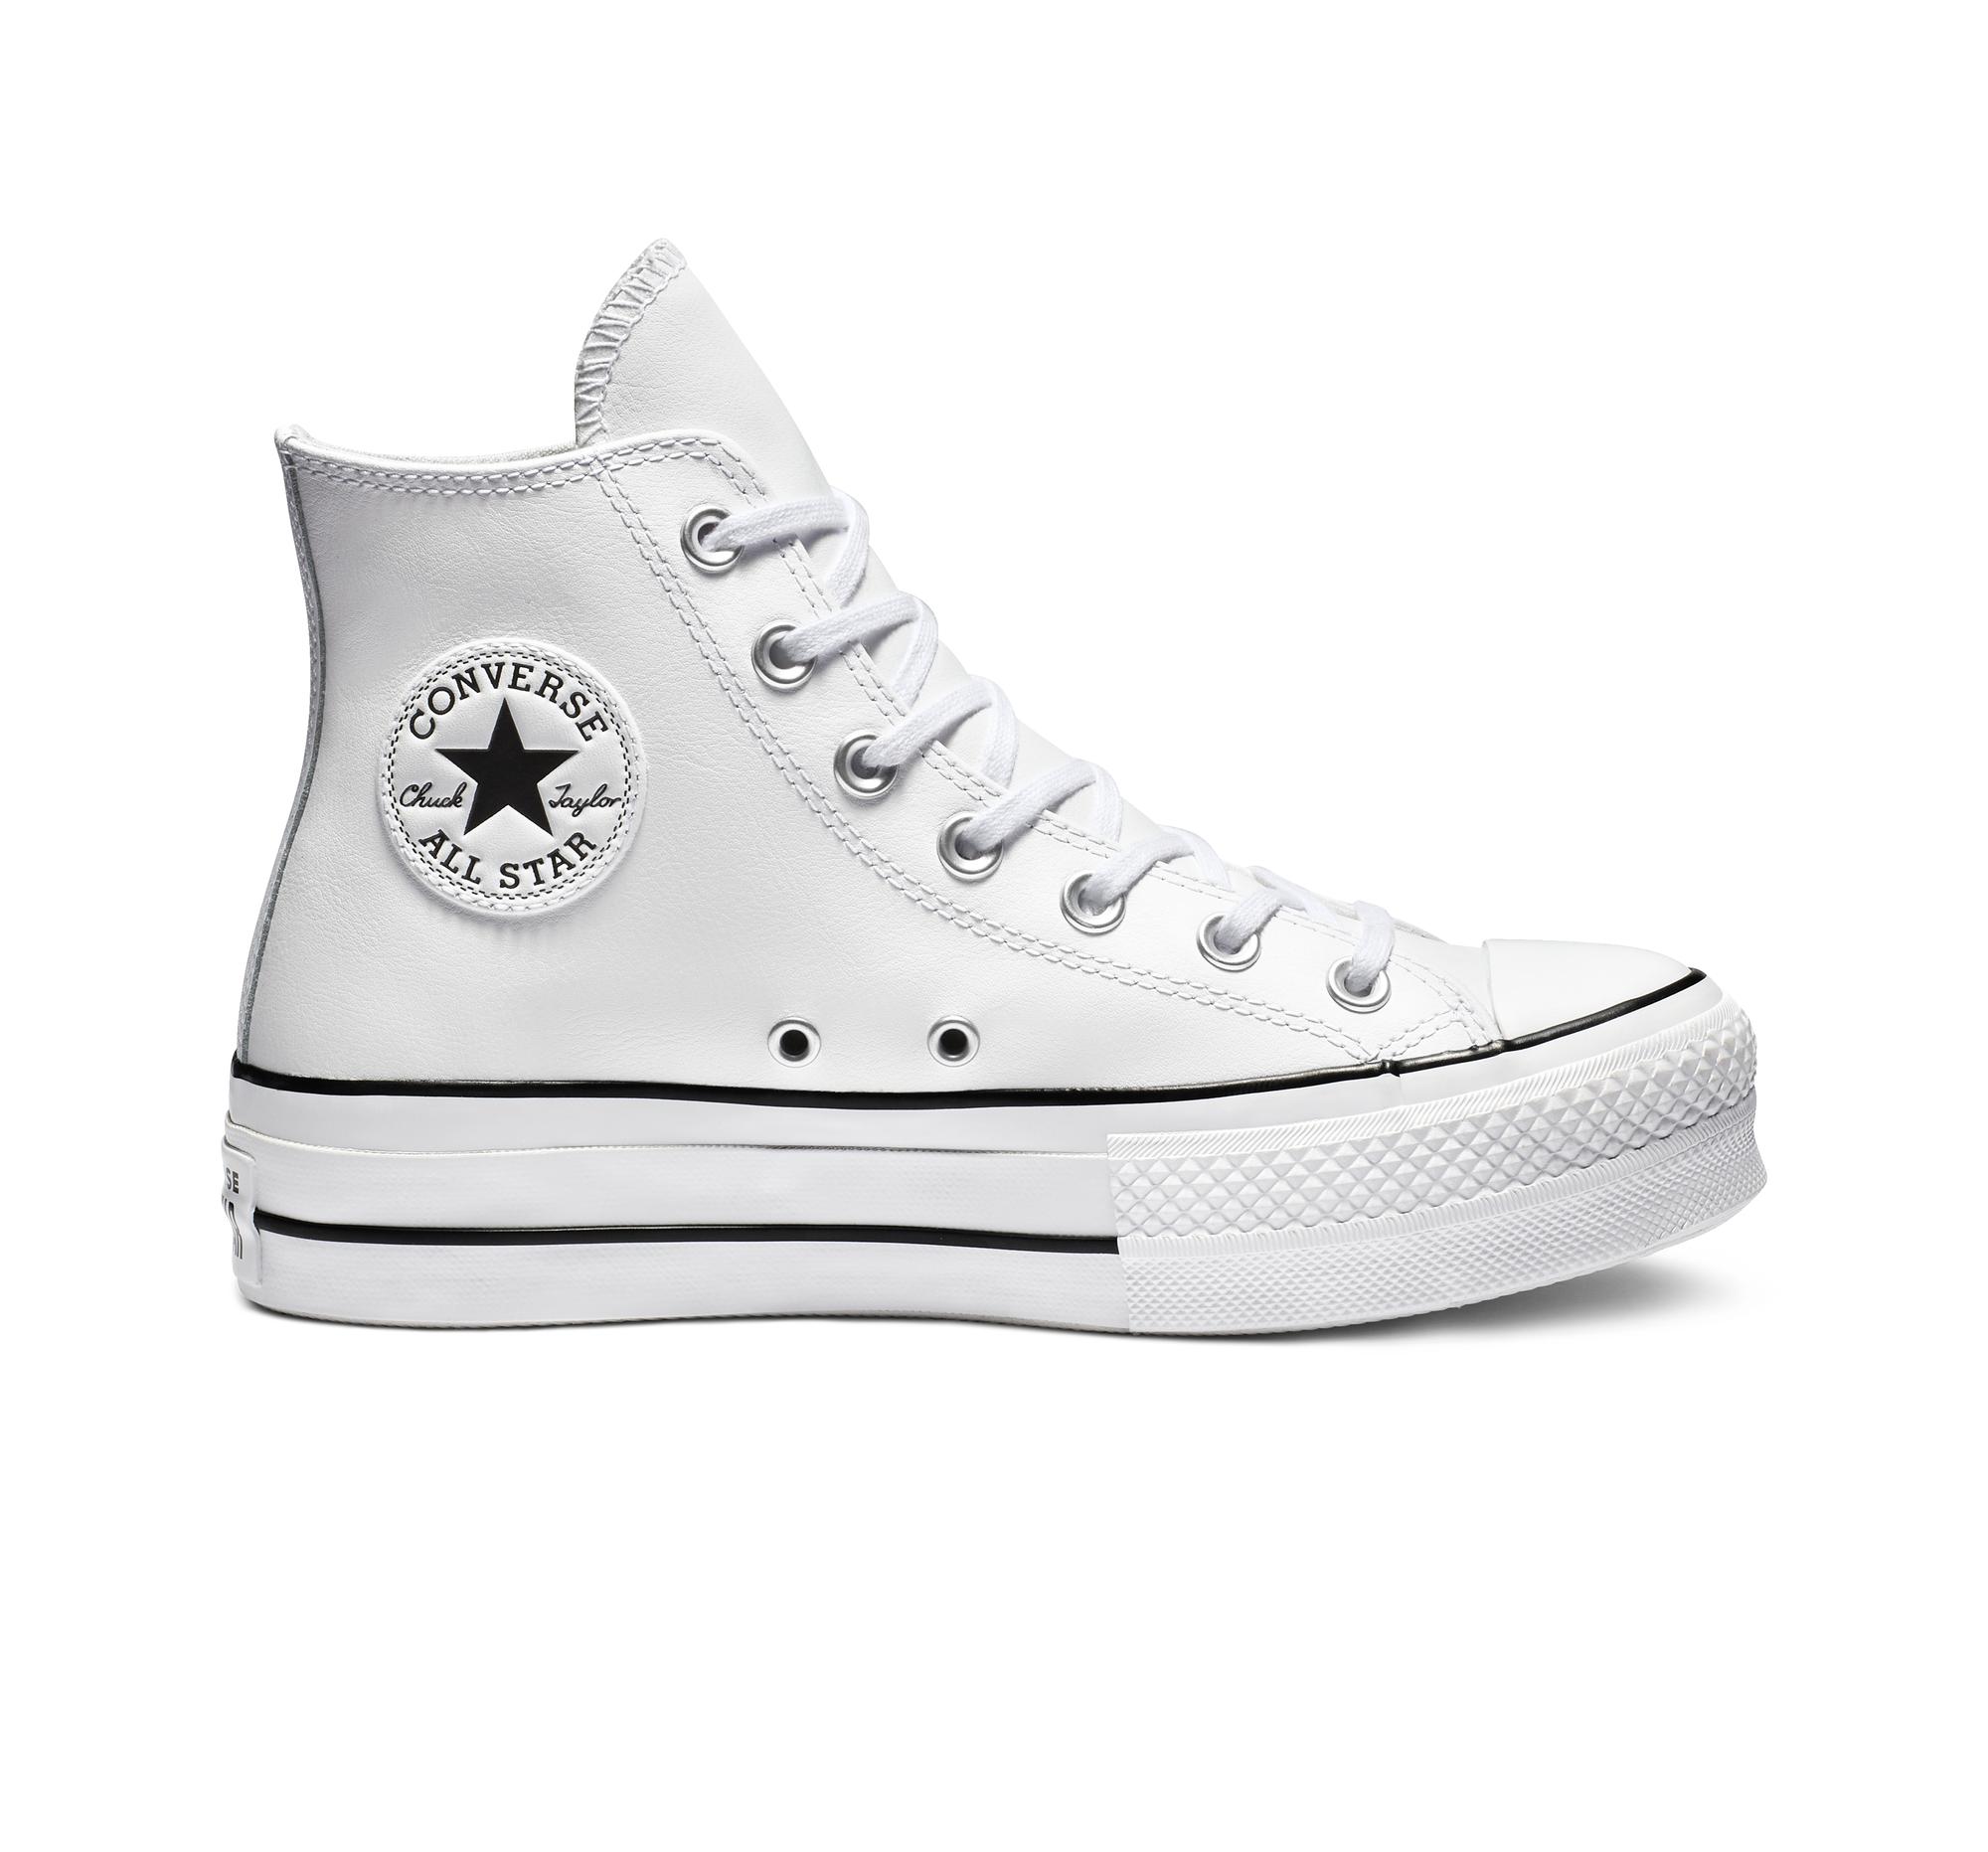 Chuck Taylor Platform Sneakers in White 